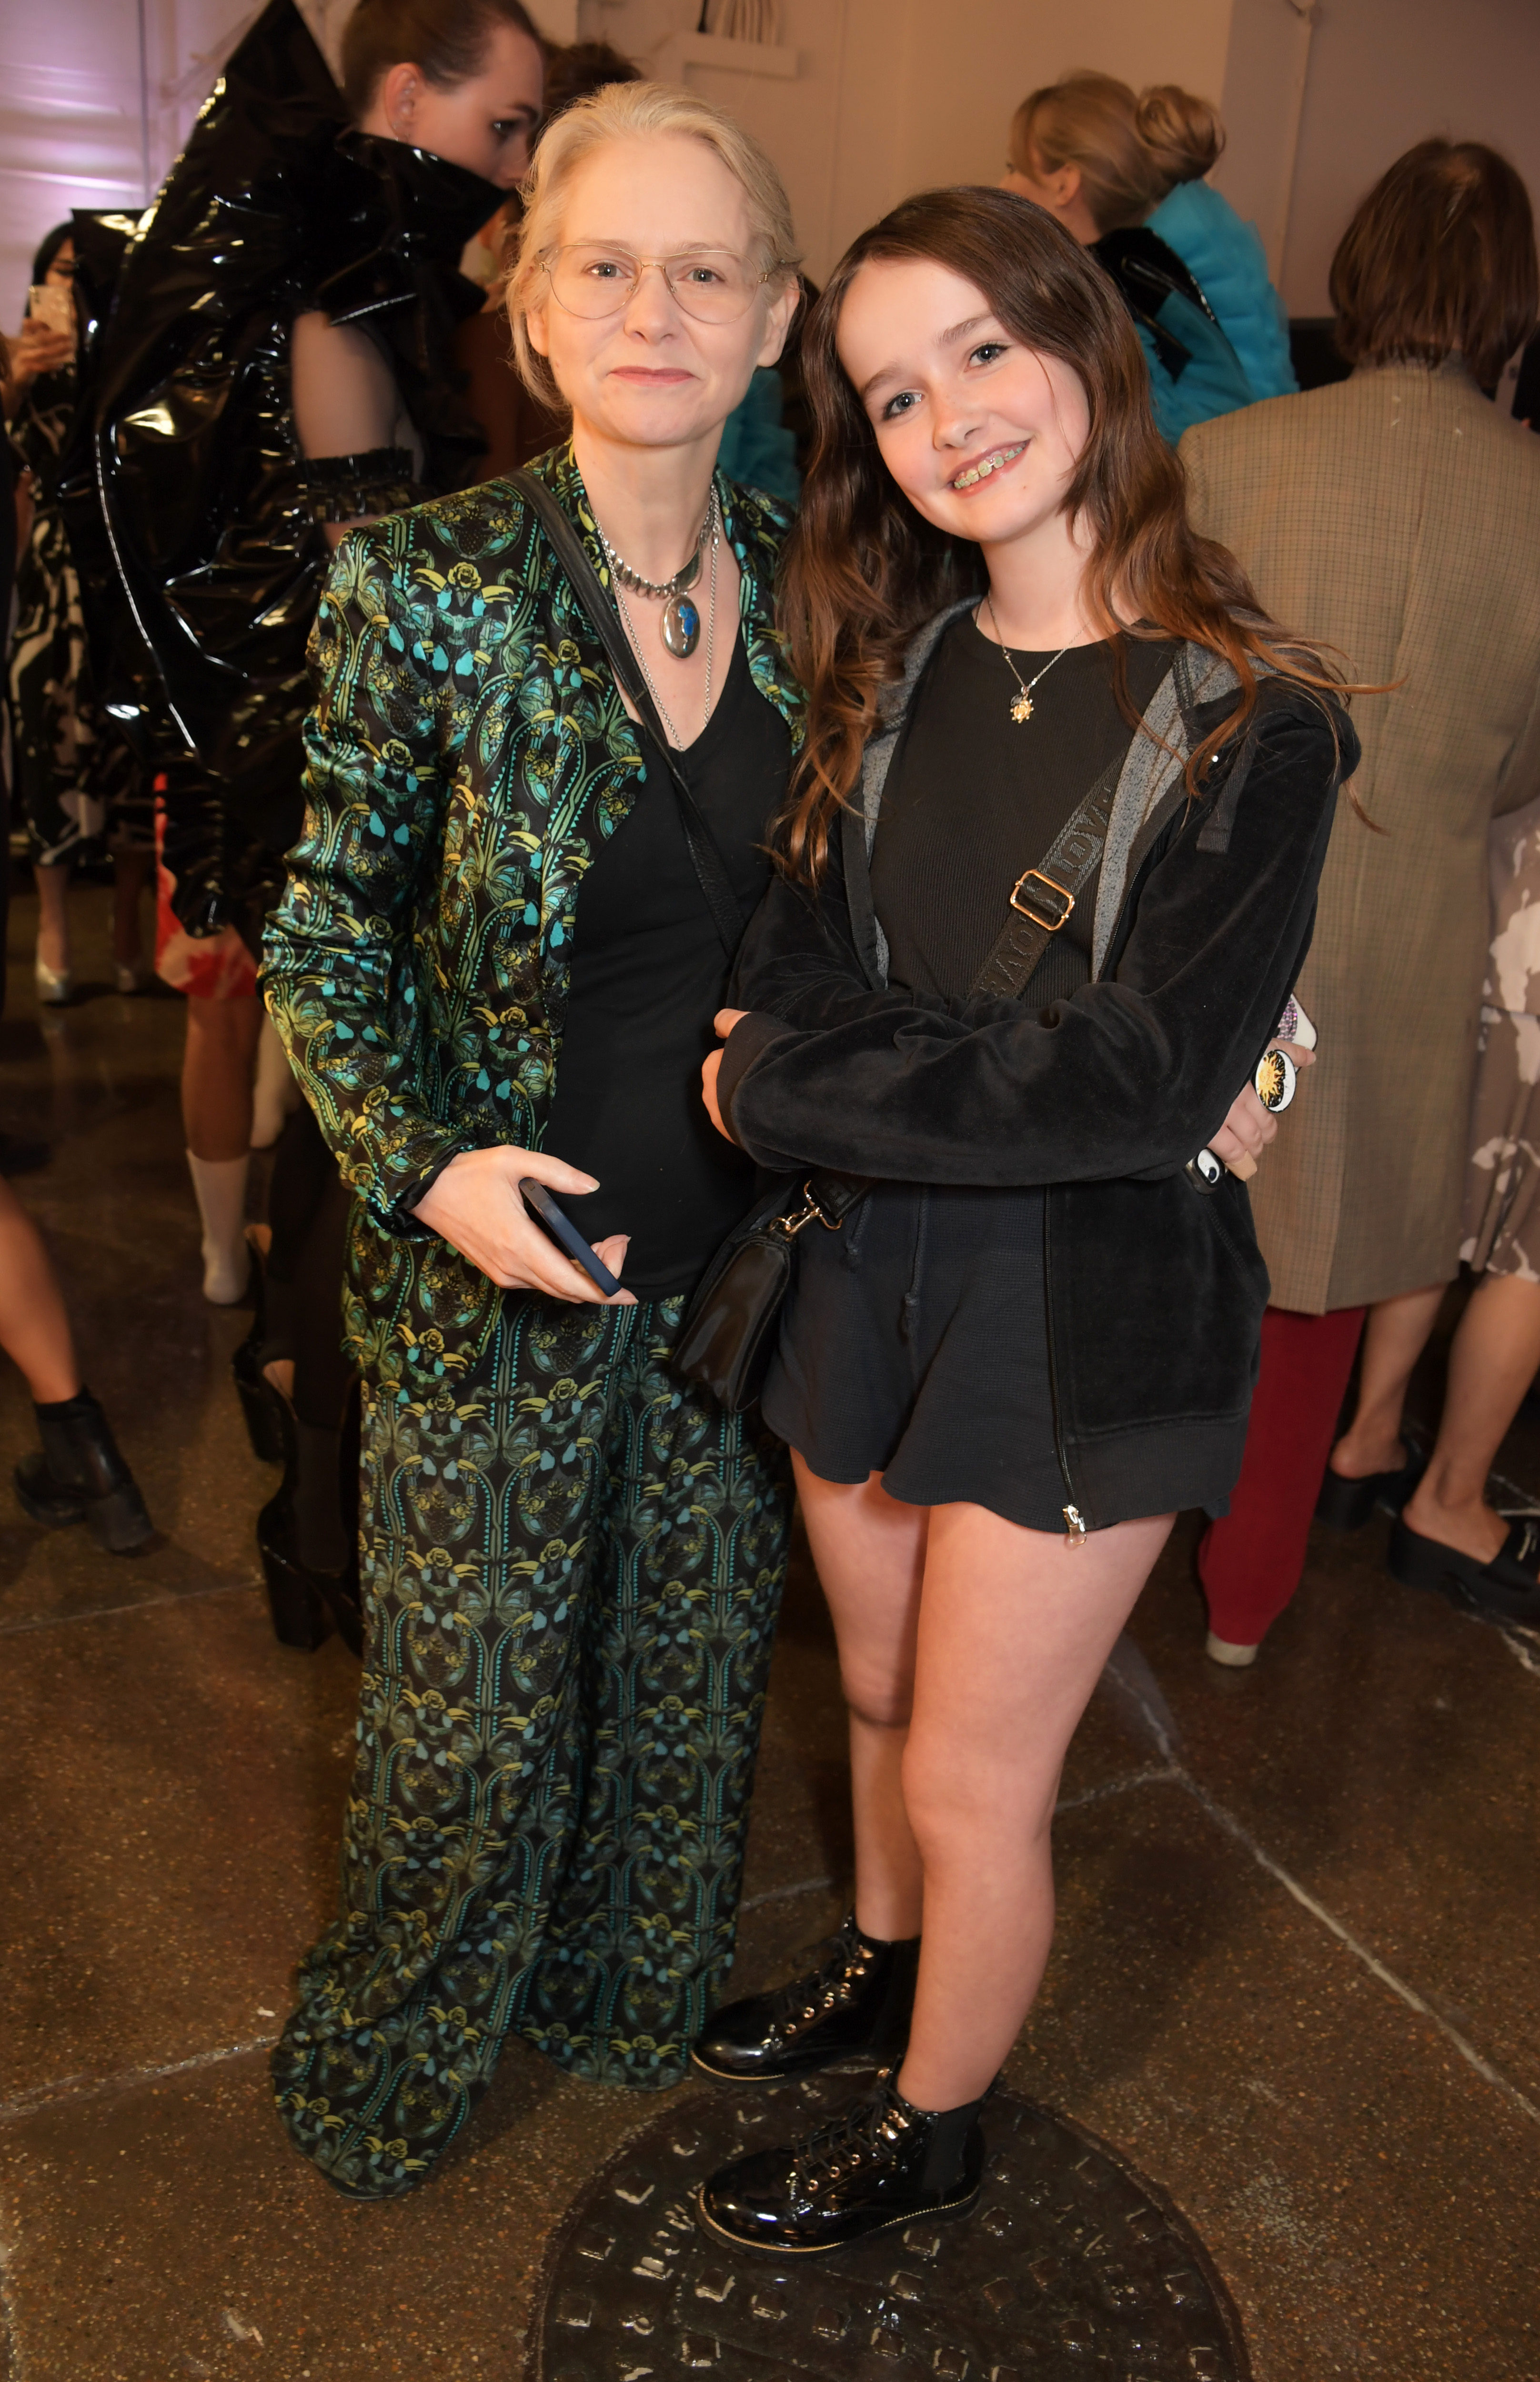 Lee Starkey and her daughter Ruby Tiger Mehler pose backstage at the Pam Hogg Show during London Fashion Week on September 17, 2022, in London, England | Source: Getty Images